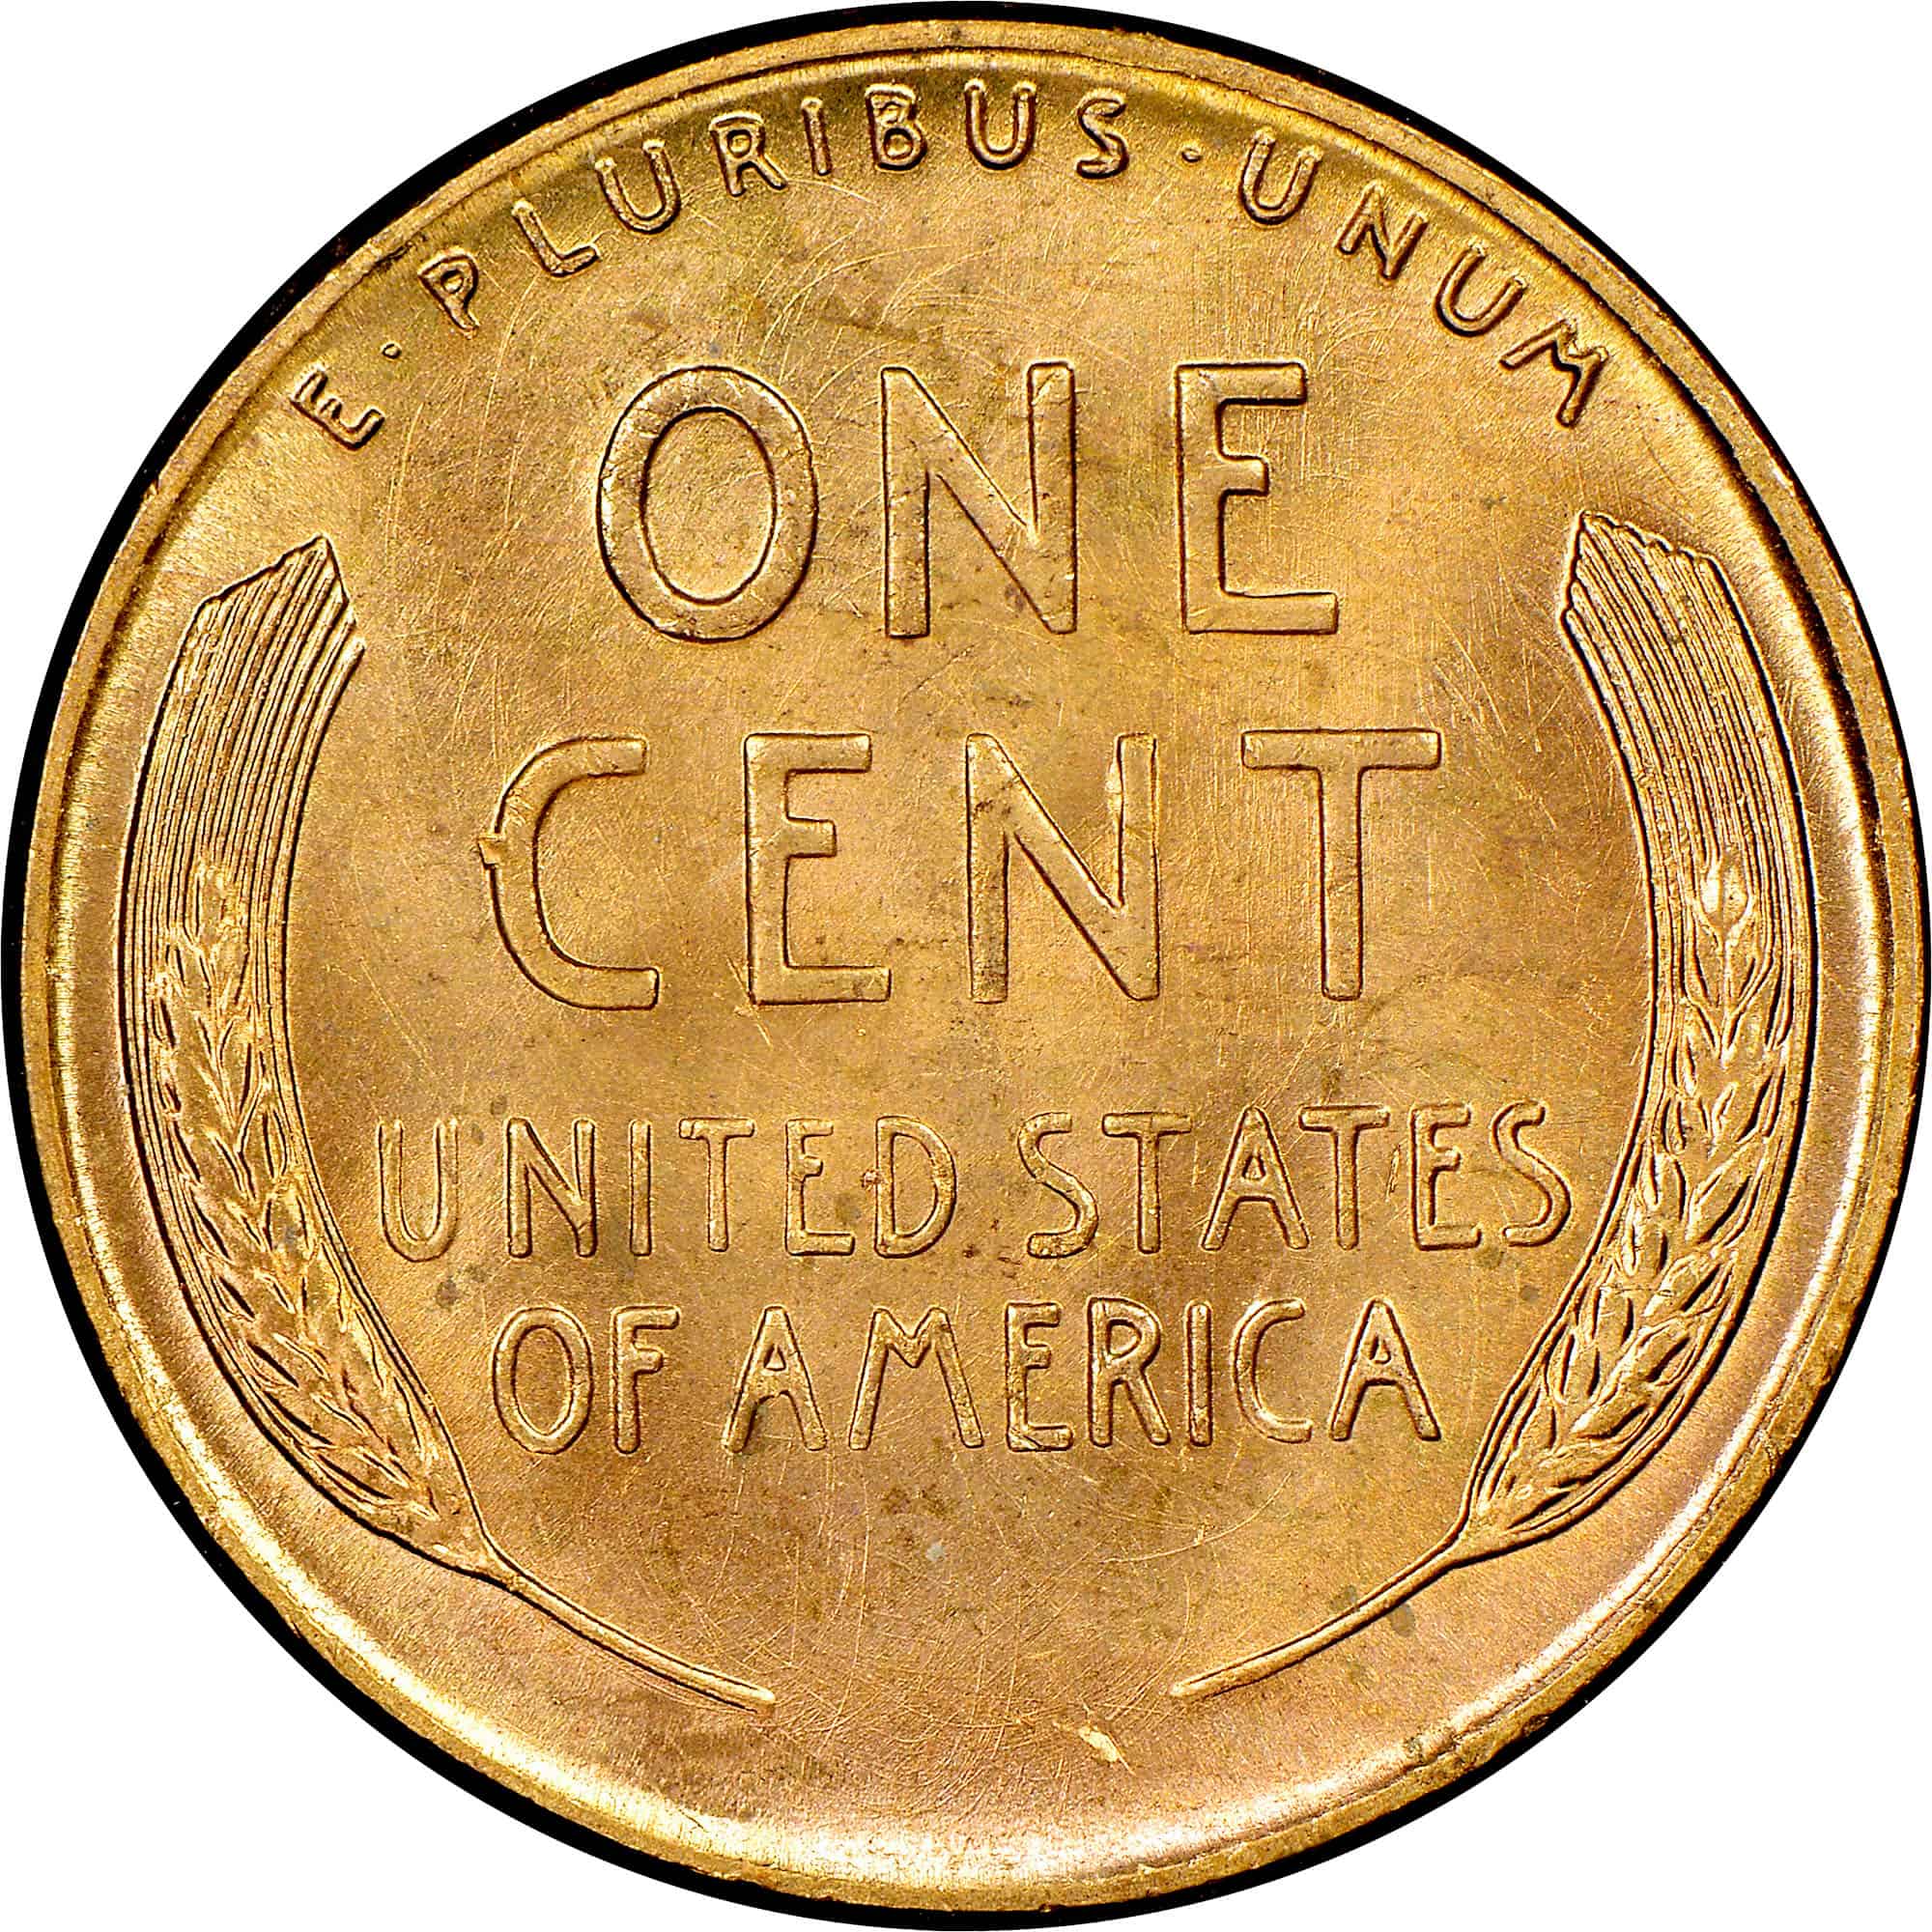 The Reverse of the 1951 Wheat Penny